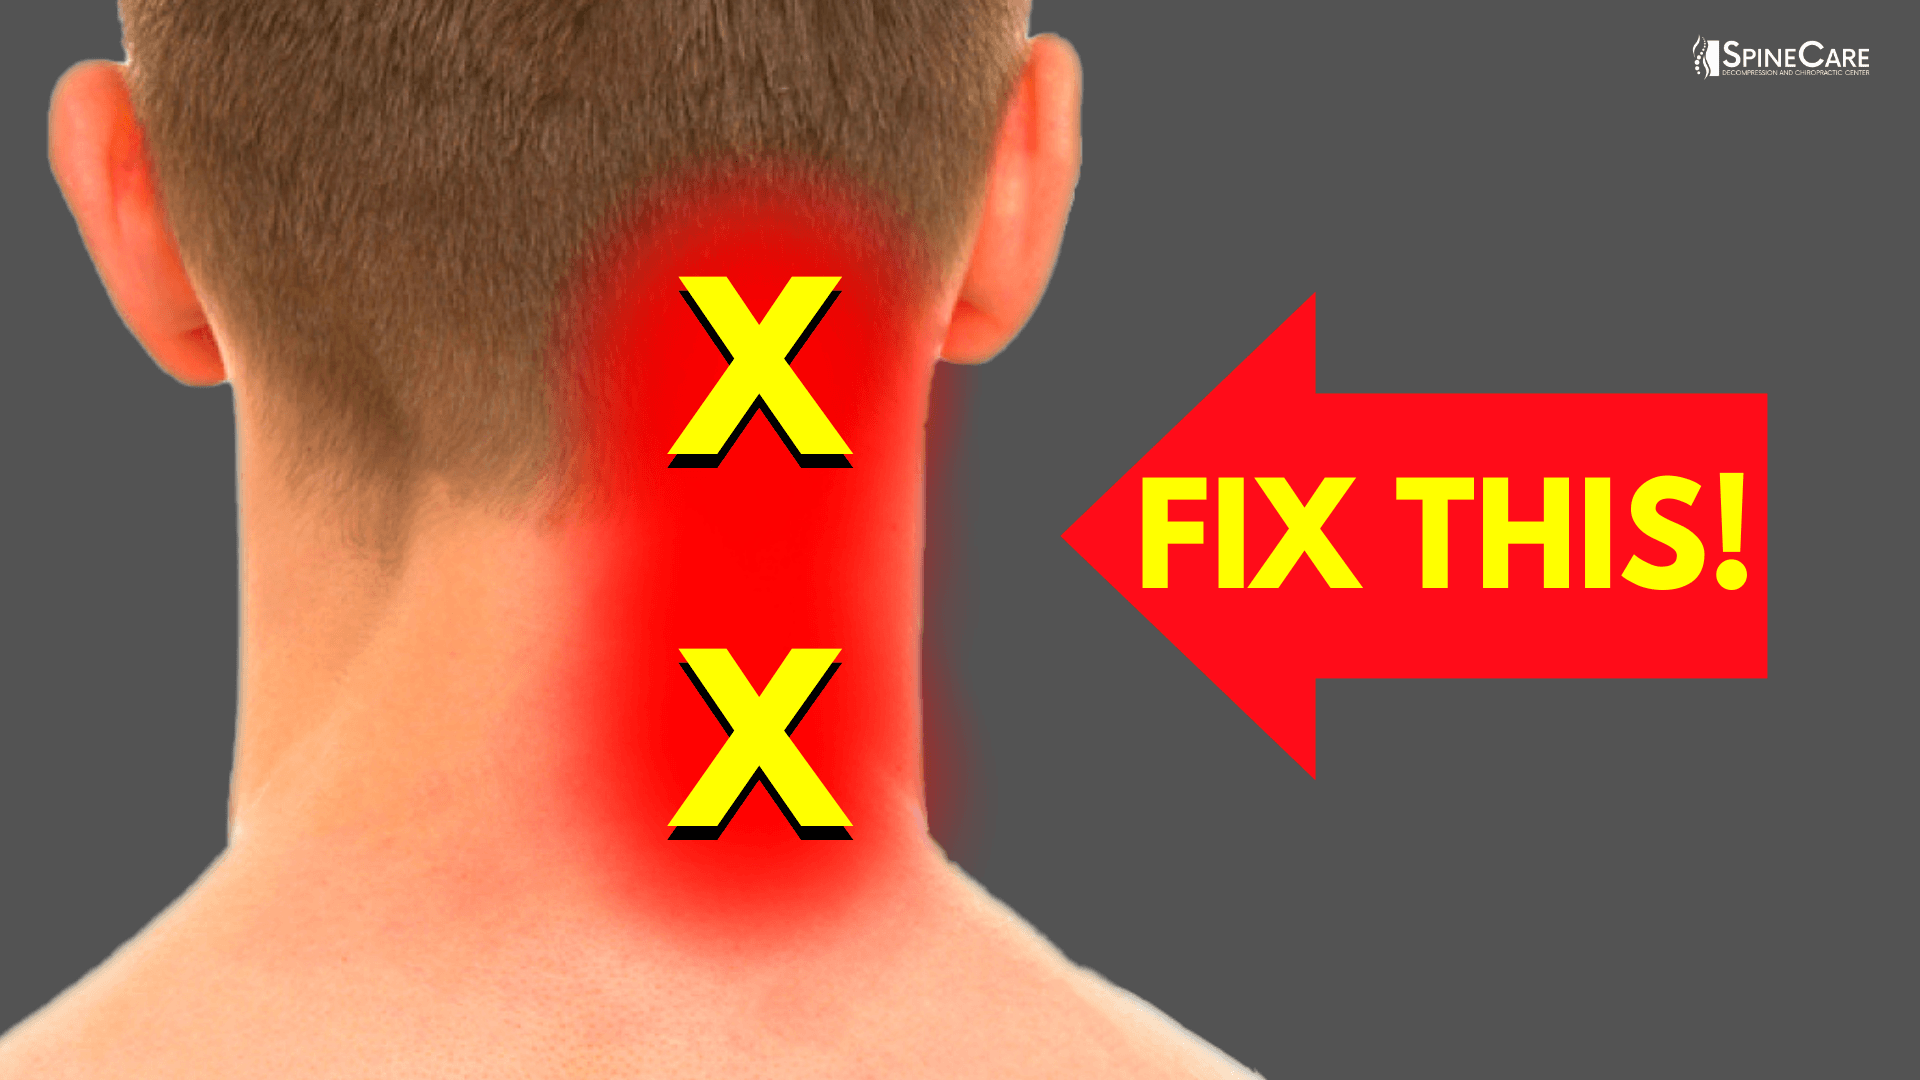 How to Fix Neck Pain off to the Side | SpineCare | St. Joseph, Michigan Chiropractor